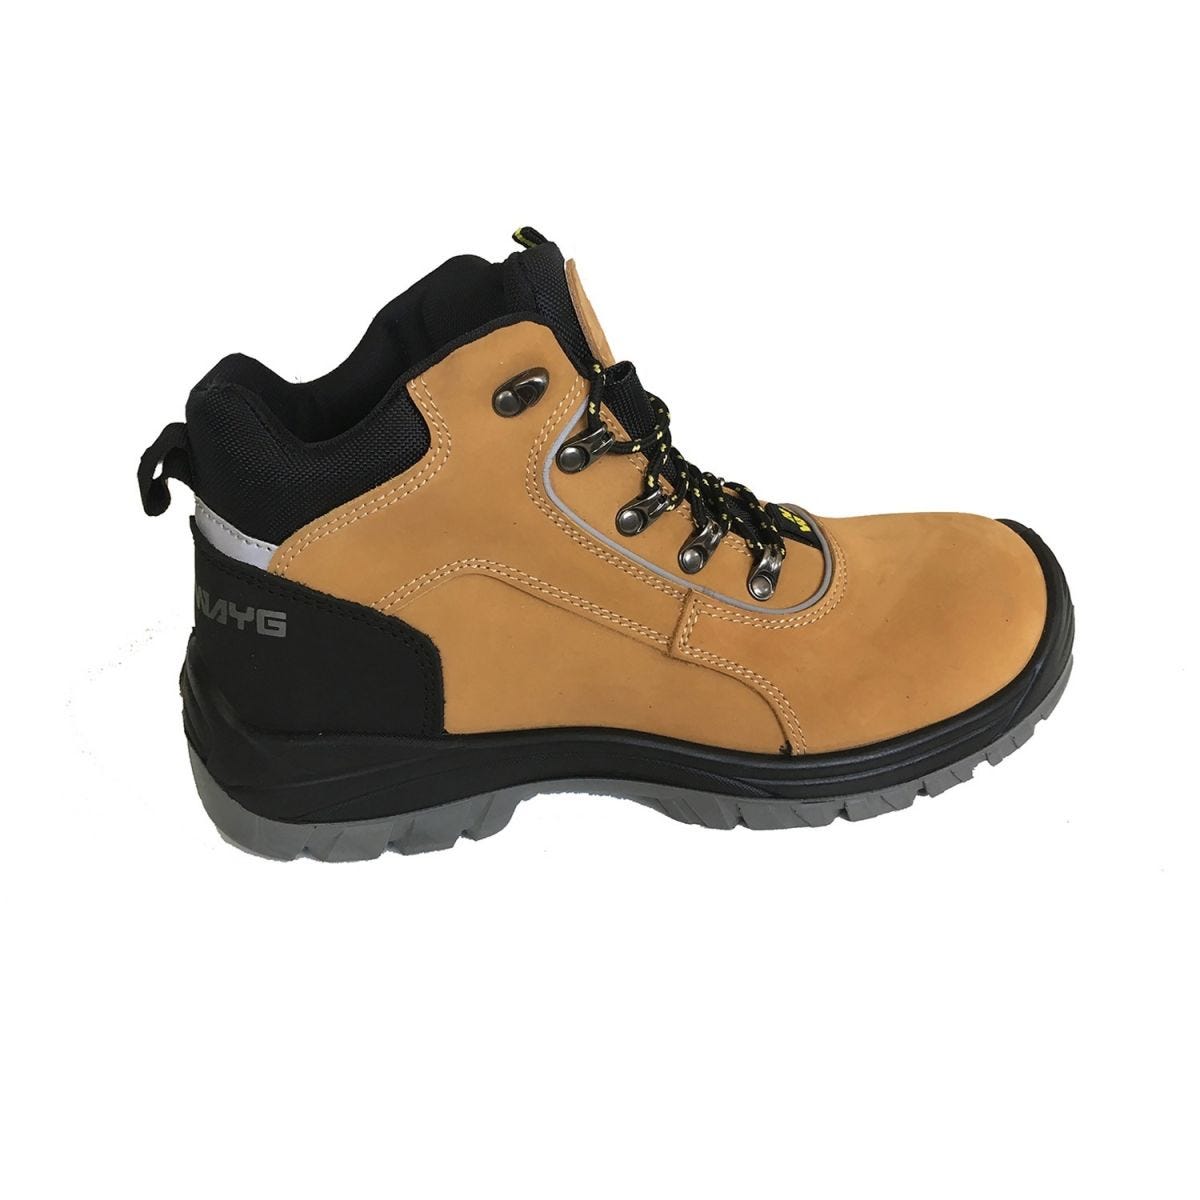 CHAUSSURES MONTANTES DE SECURITE RYAN CAMEL - NORTH WAYS - Taille 44 1